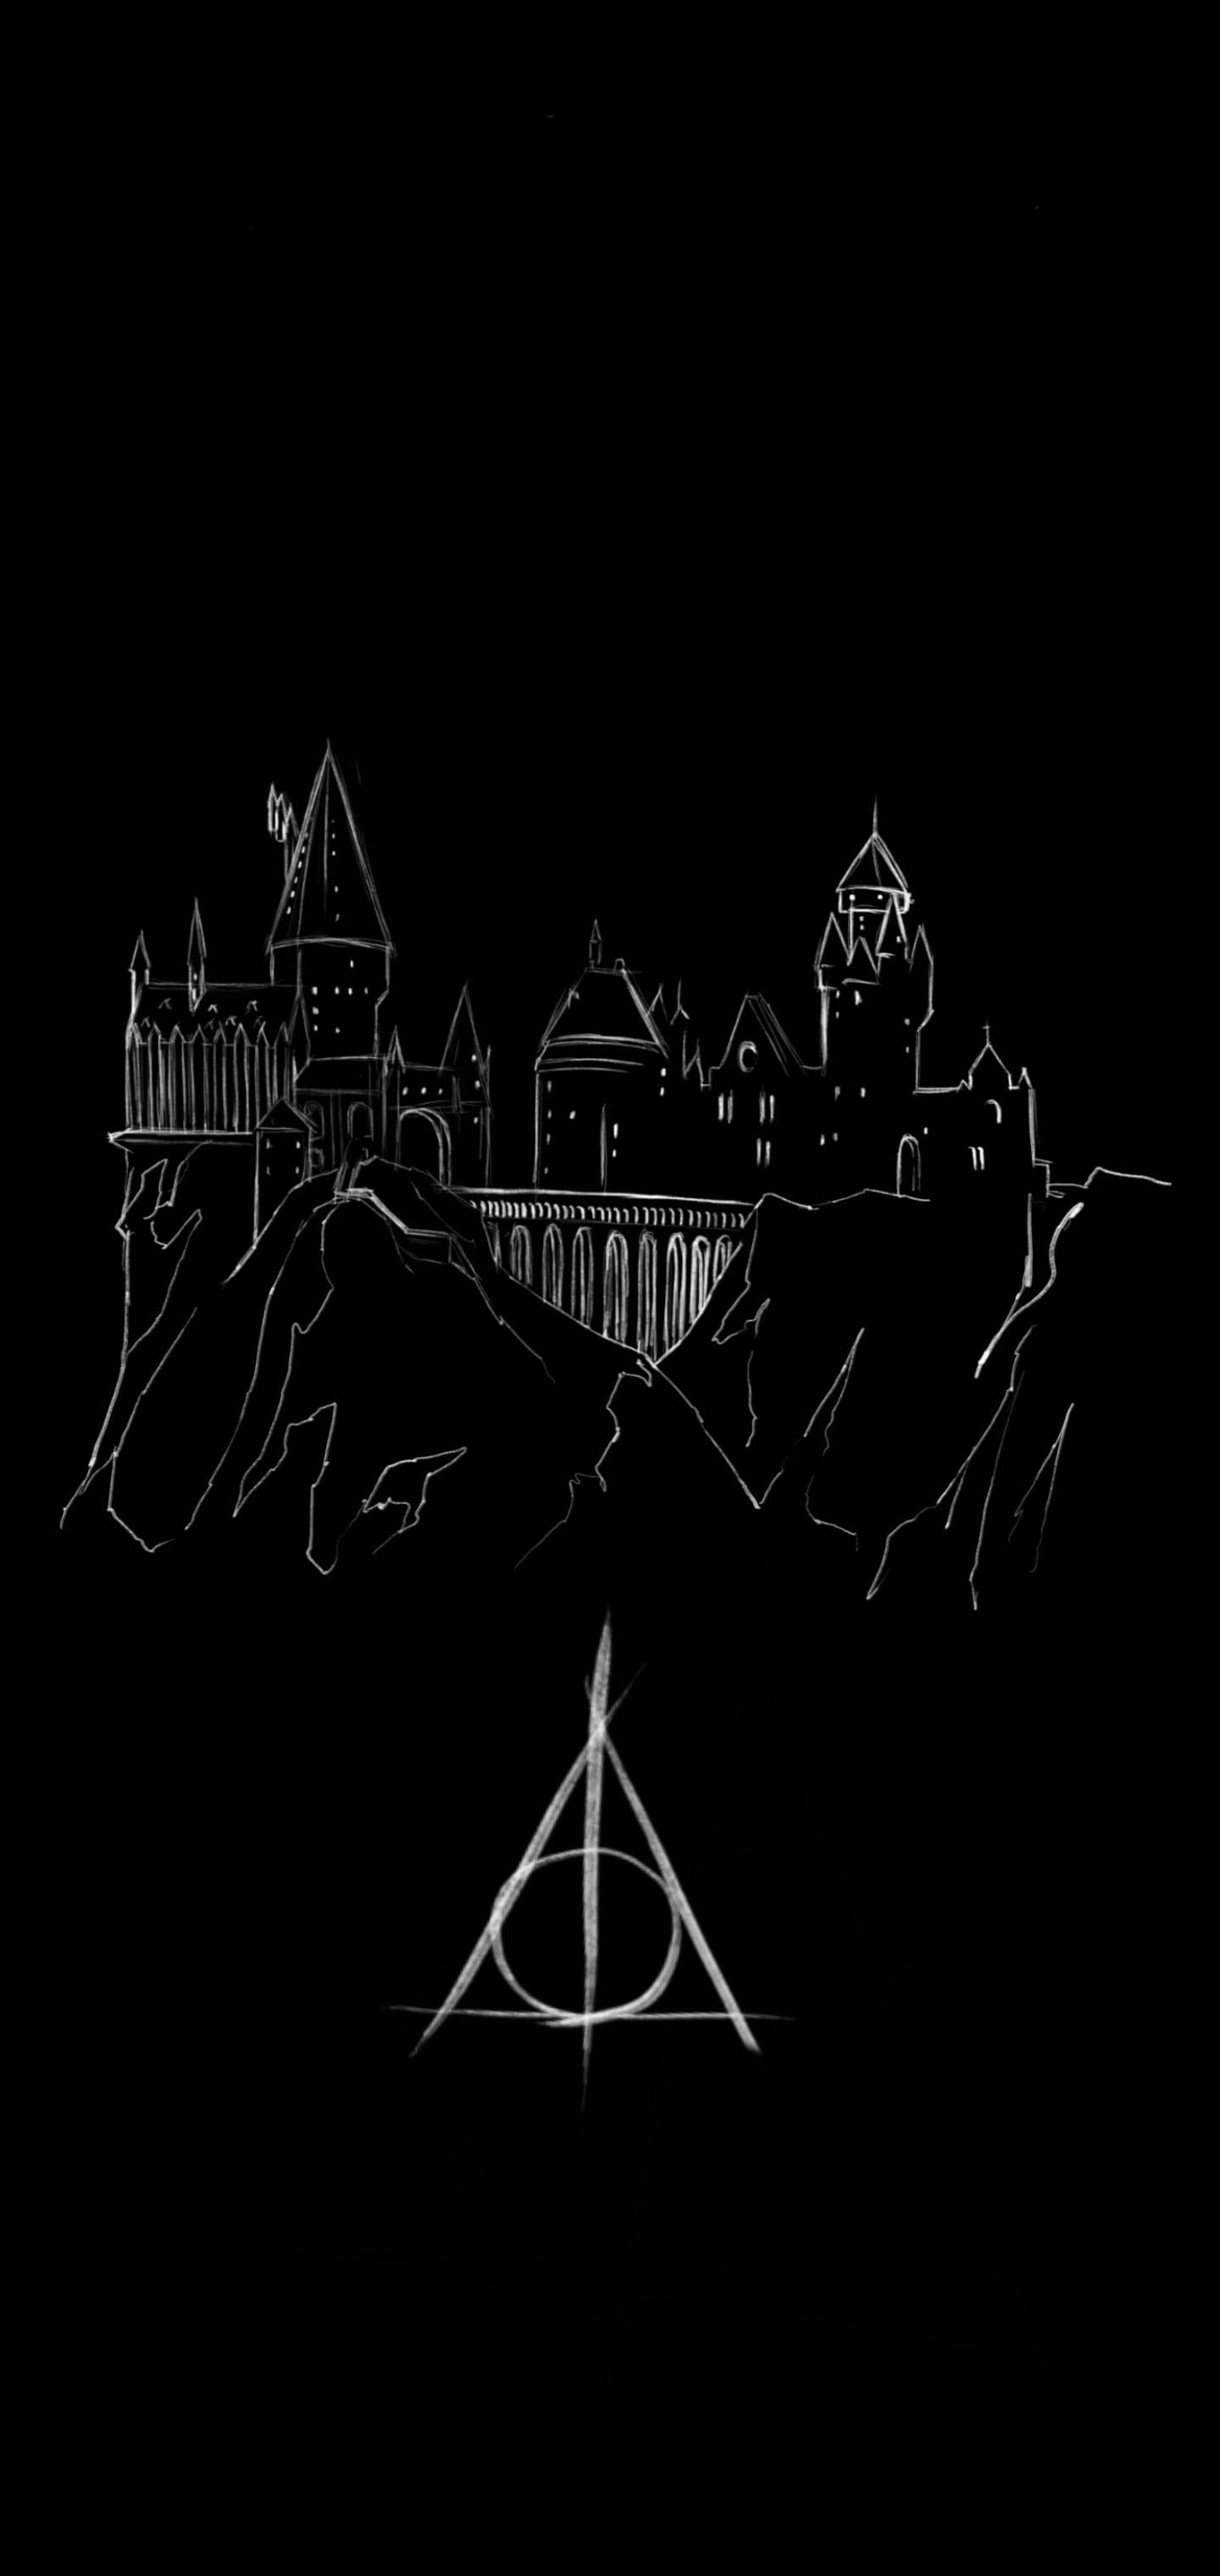 Download Deathly Hallows Harry Potter Hogwarts Iphone Wallpaper | Wallpapers .com